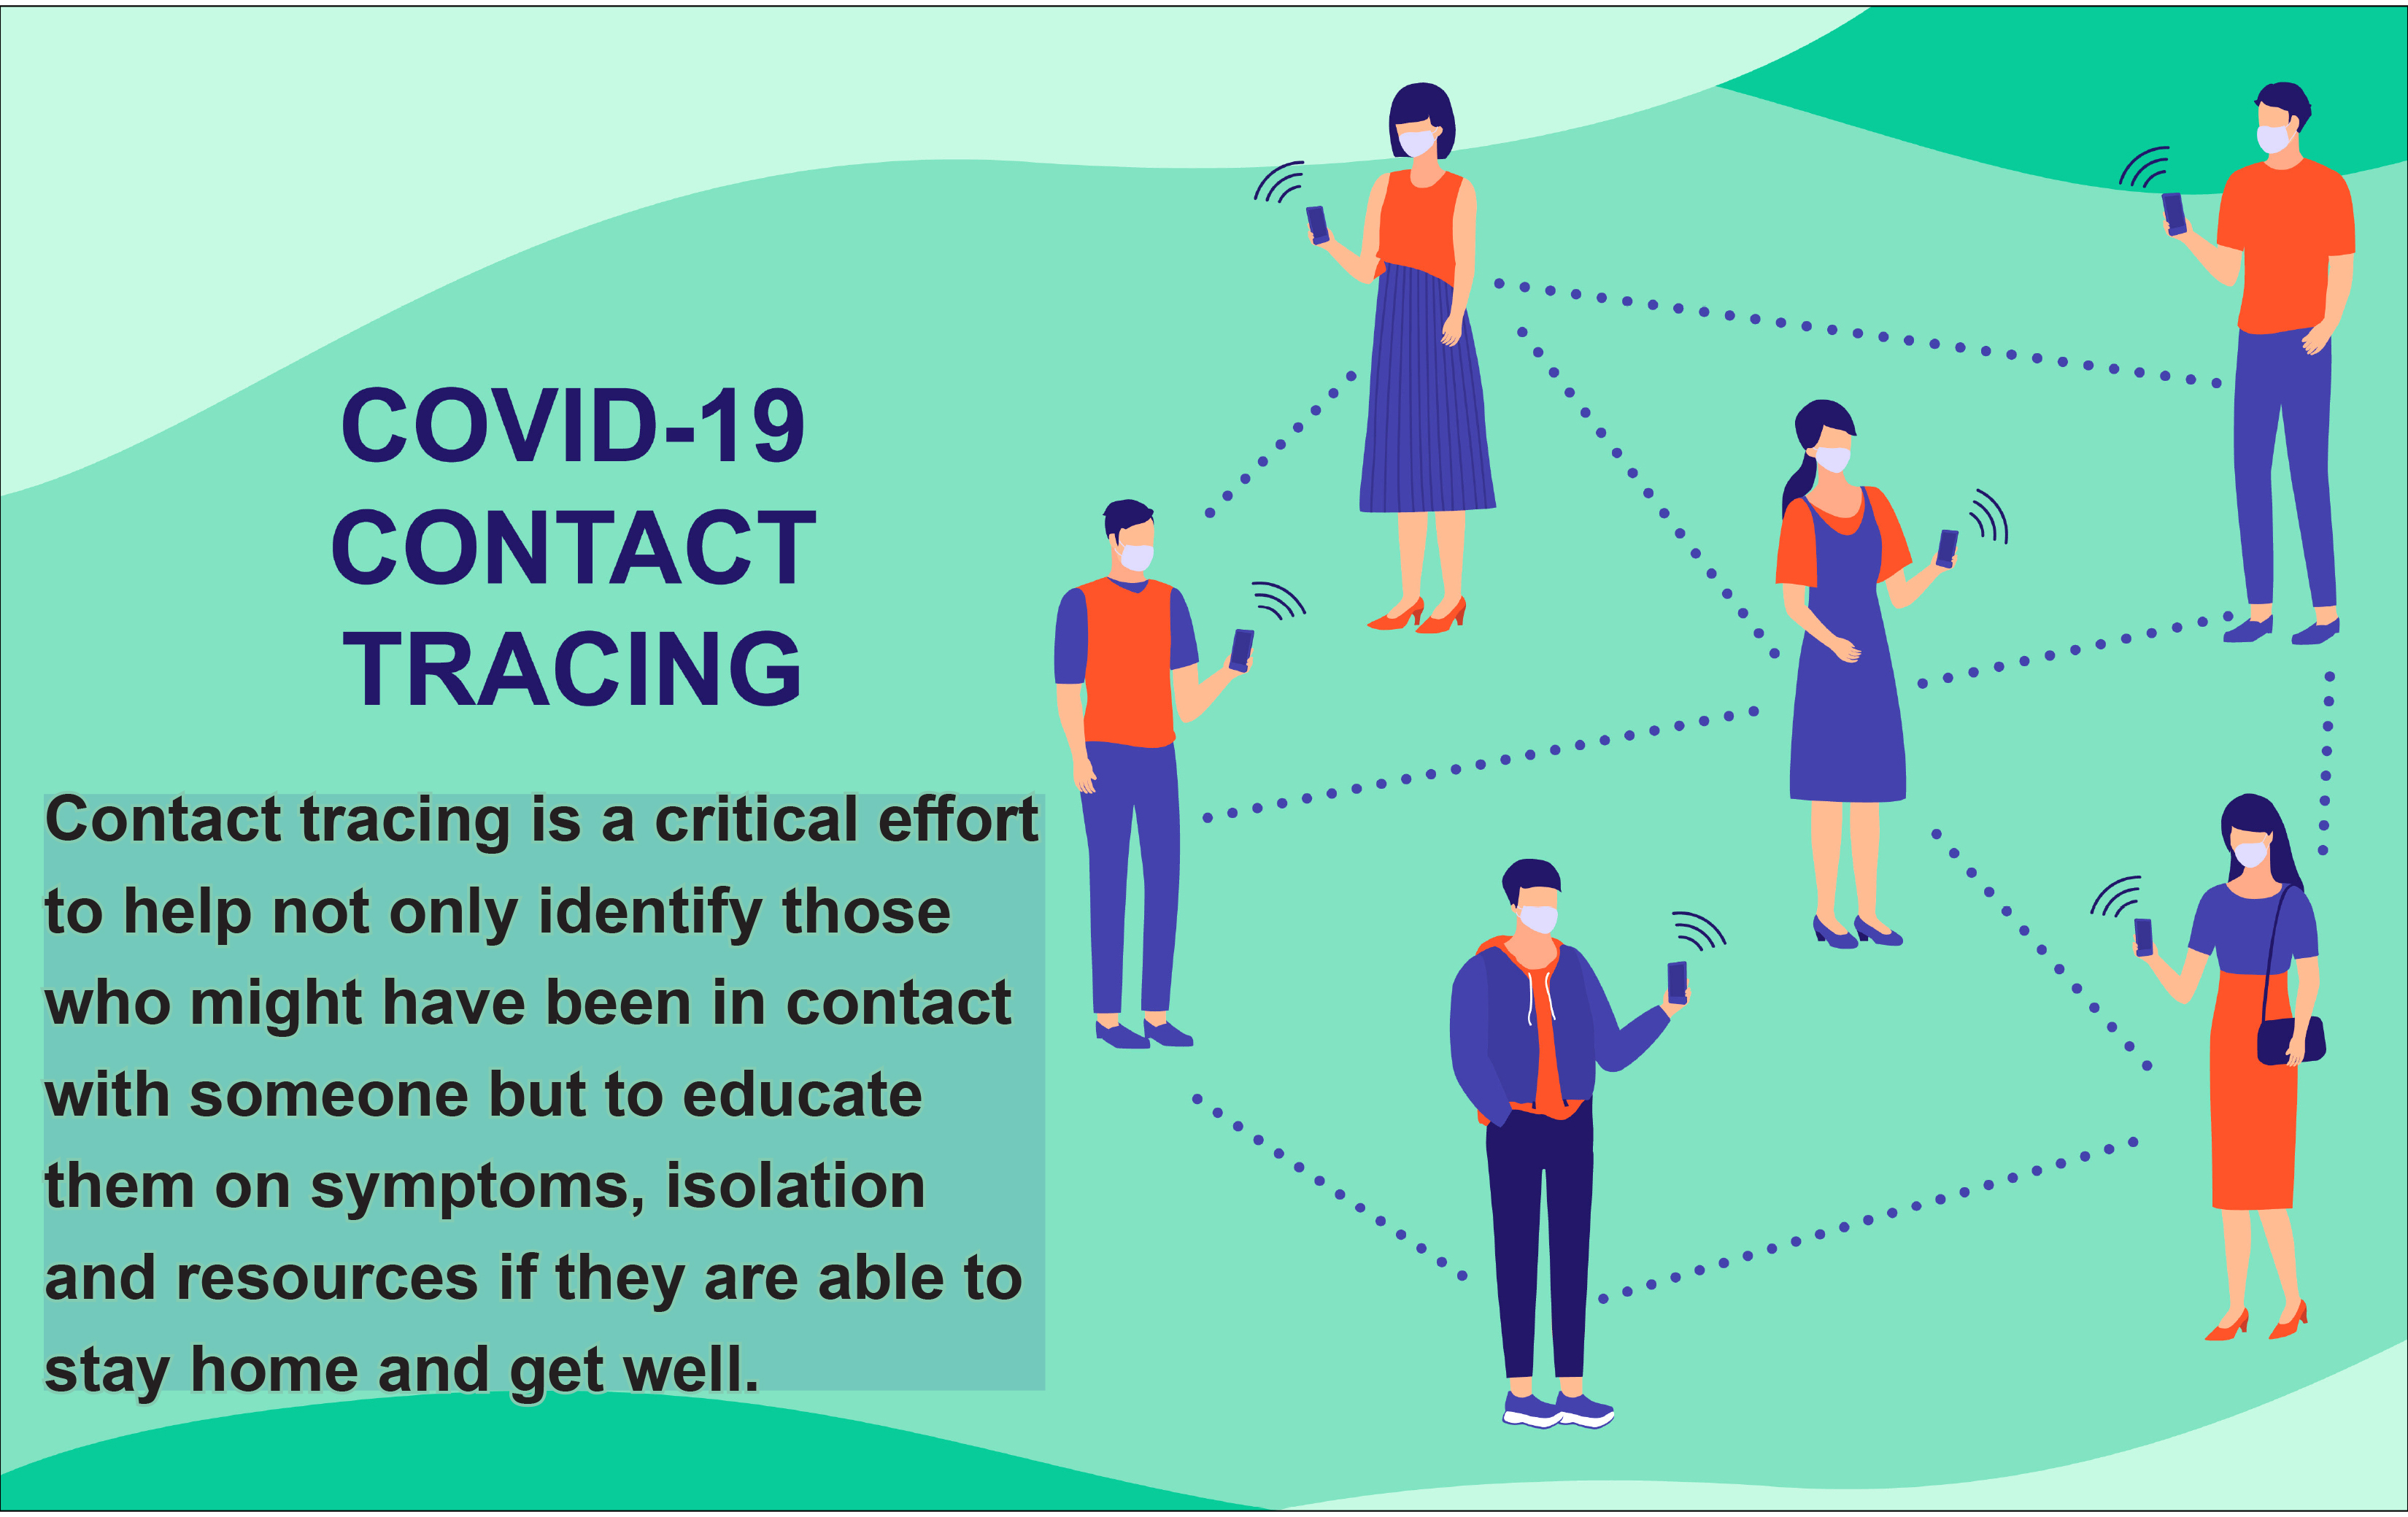 beyond contact tracing